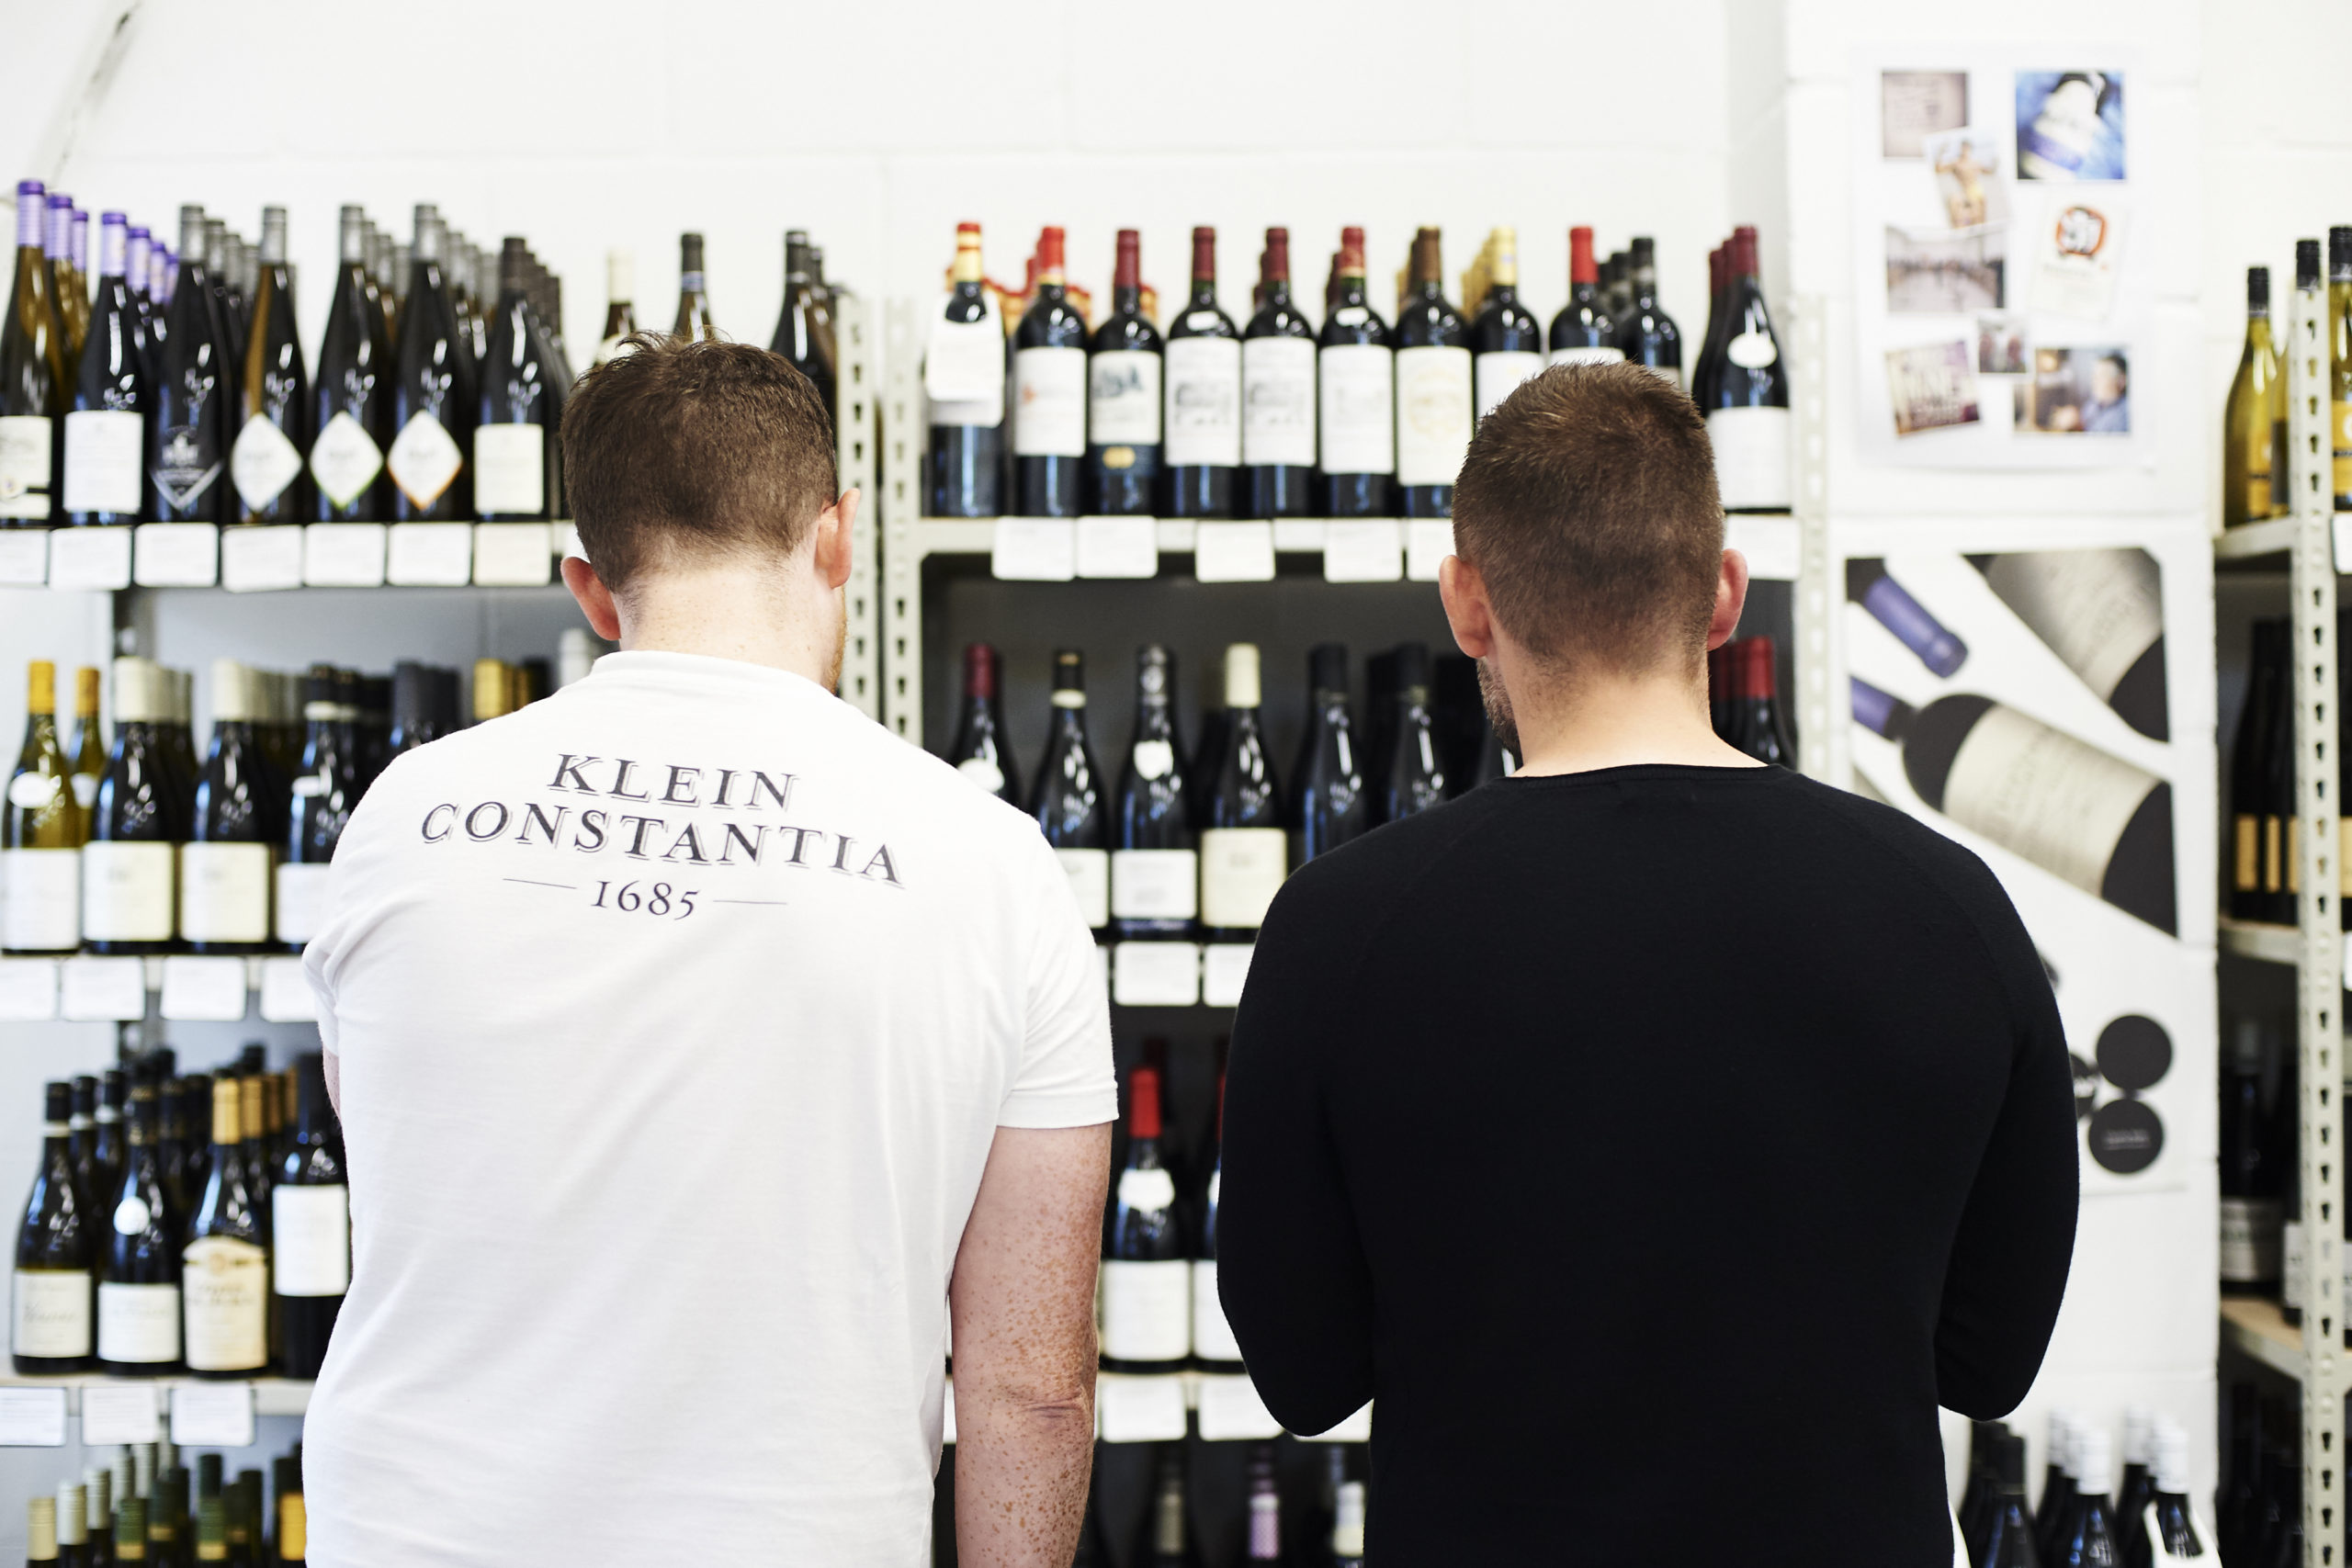 What We're Drinking subscription by HarperWells, independent wine merchants